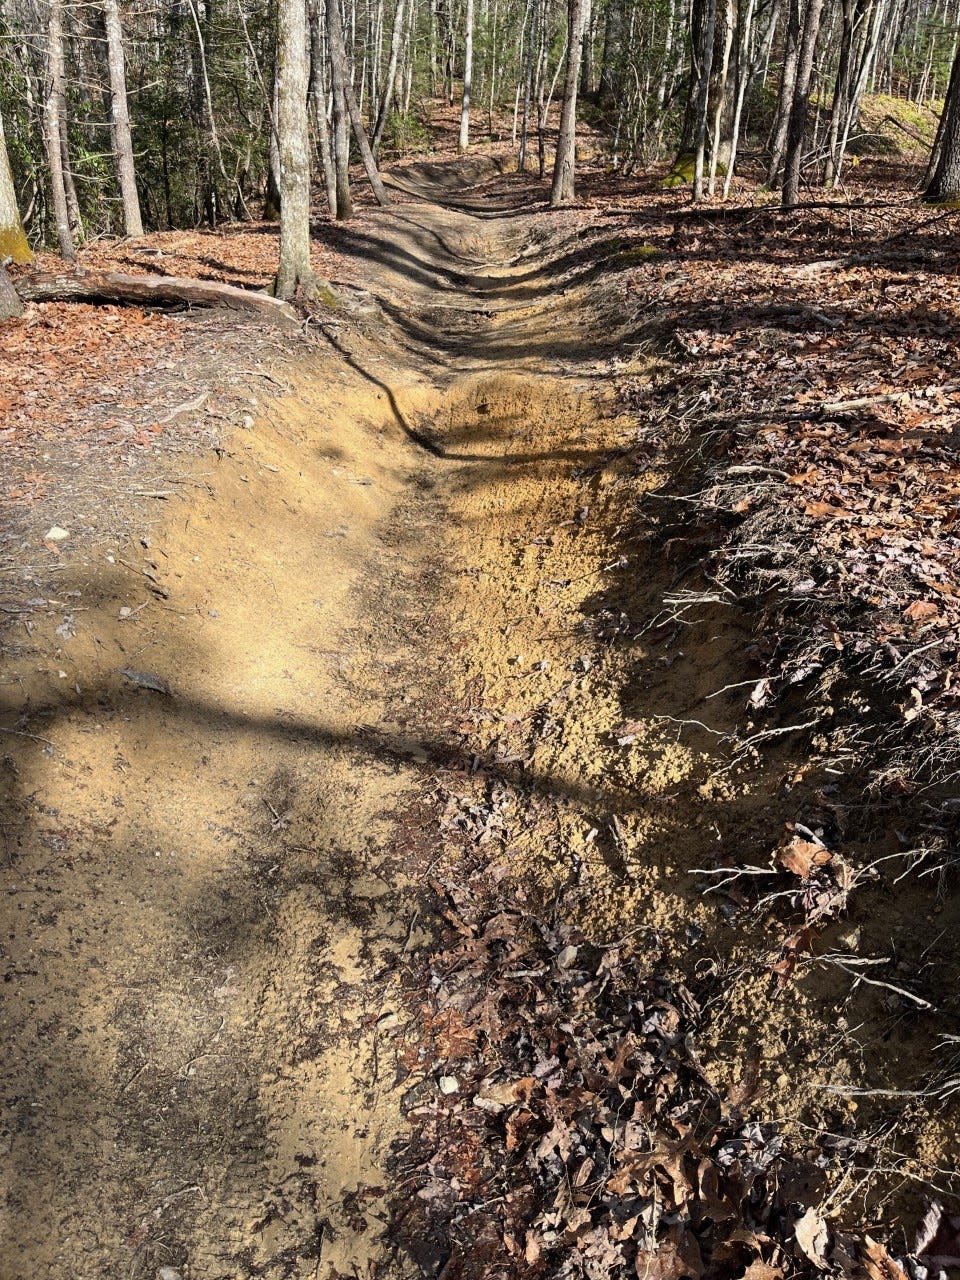 Erosion has taken a toll along the Ridgeline Trail in DuPont State Recreational Forest.